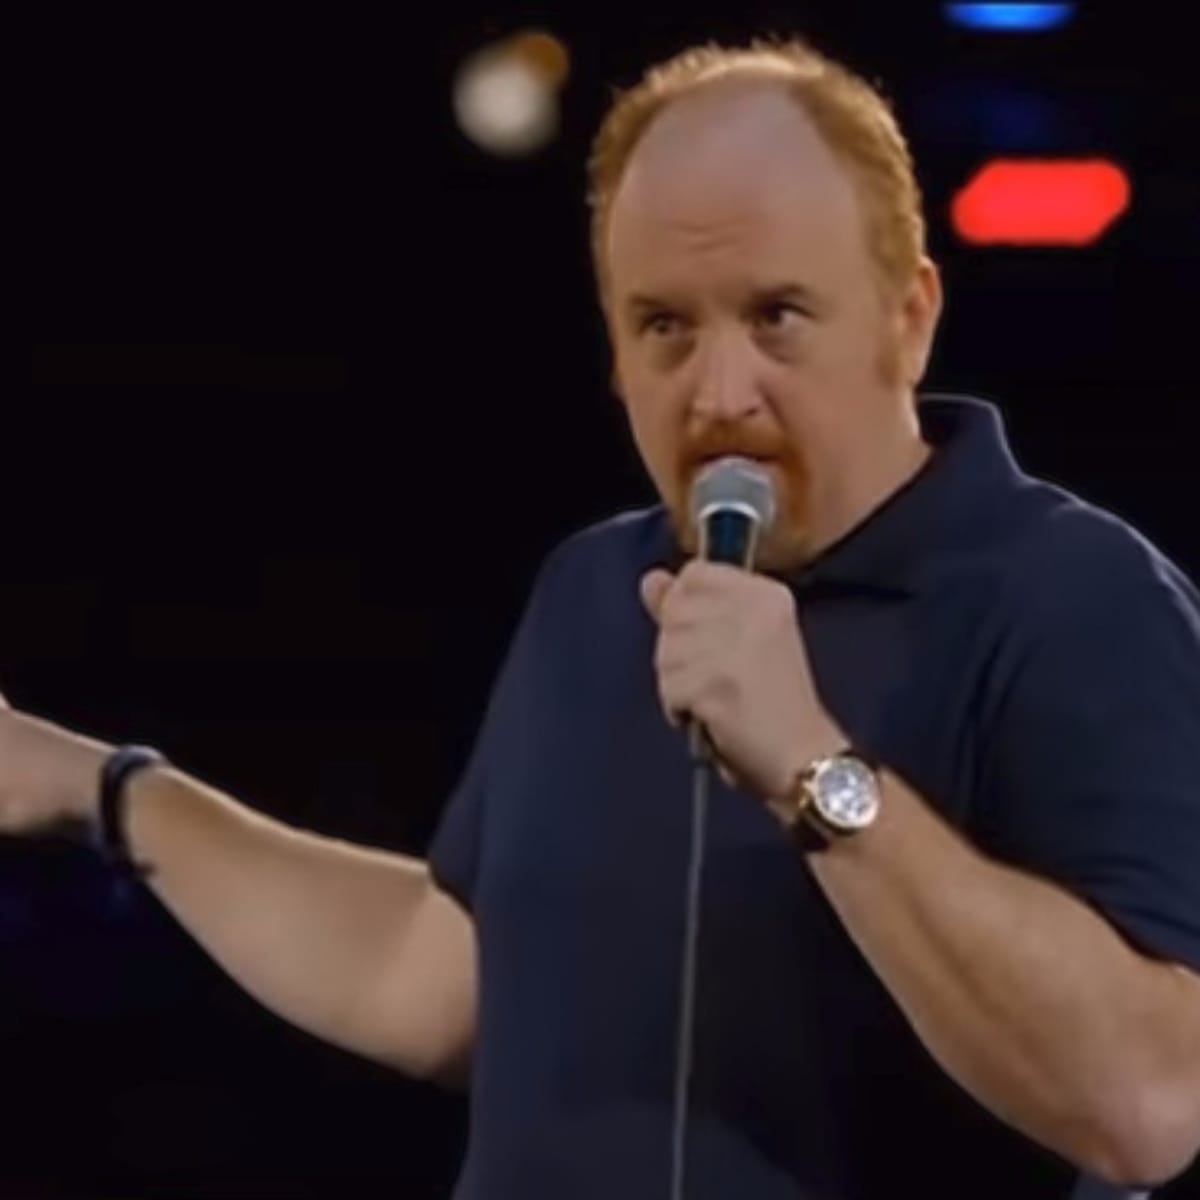 Live at Madison Square Garden by Louis C.K. on TIDAL